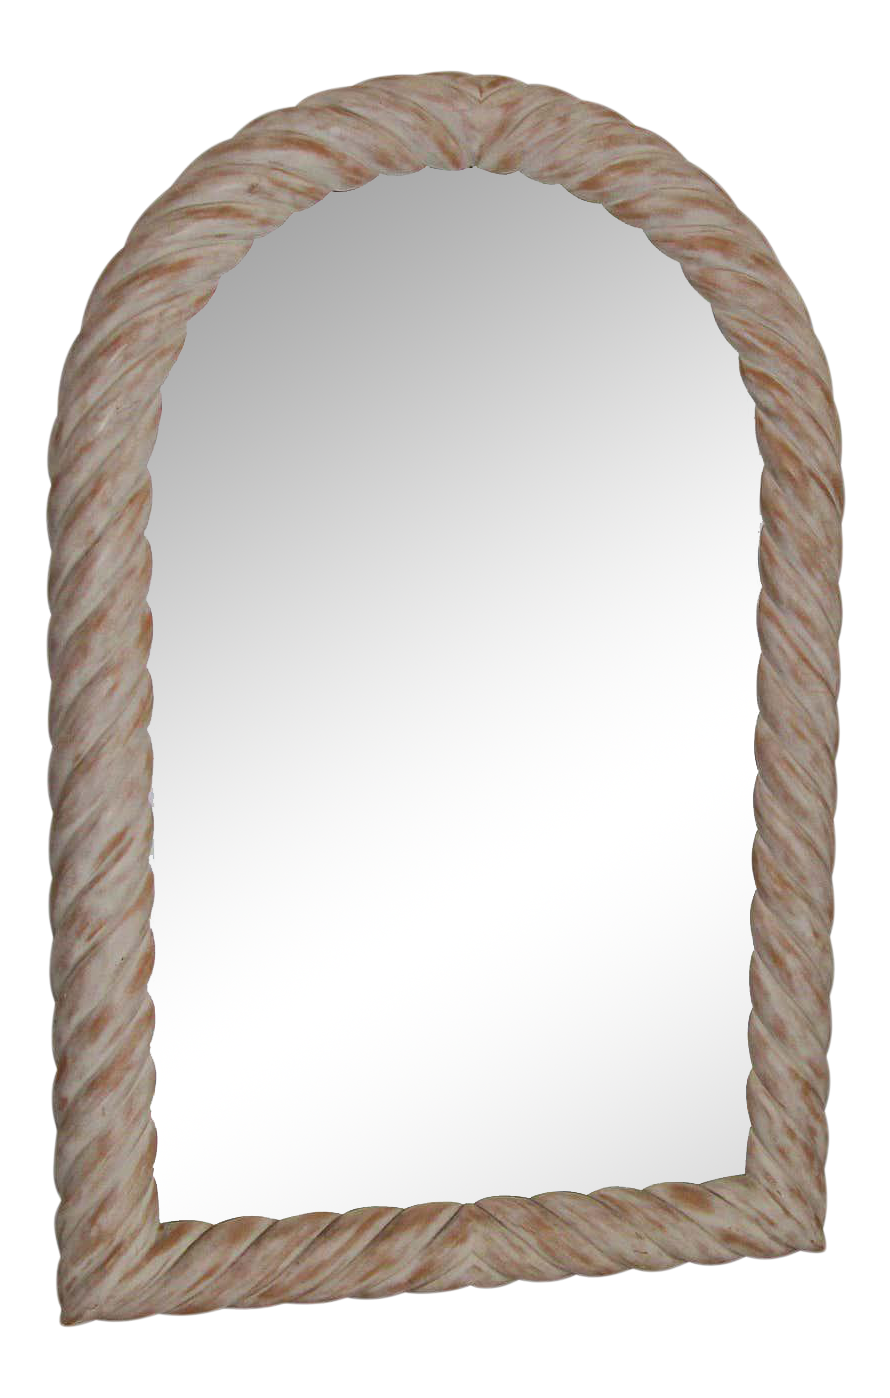 White Washed Out Wood Arched French Wall Mirror